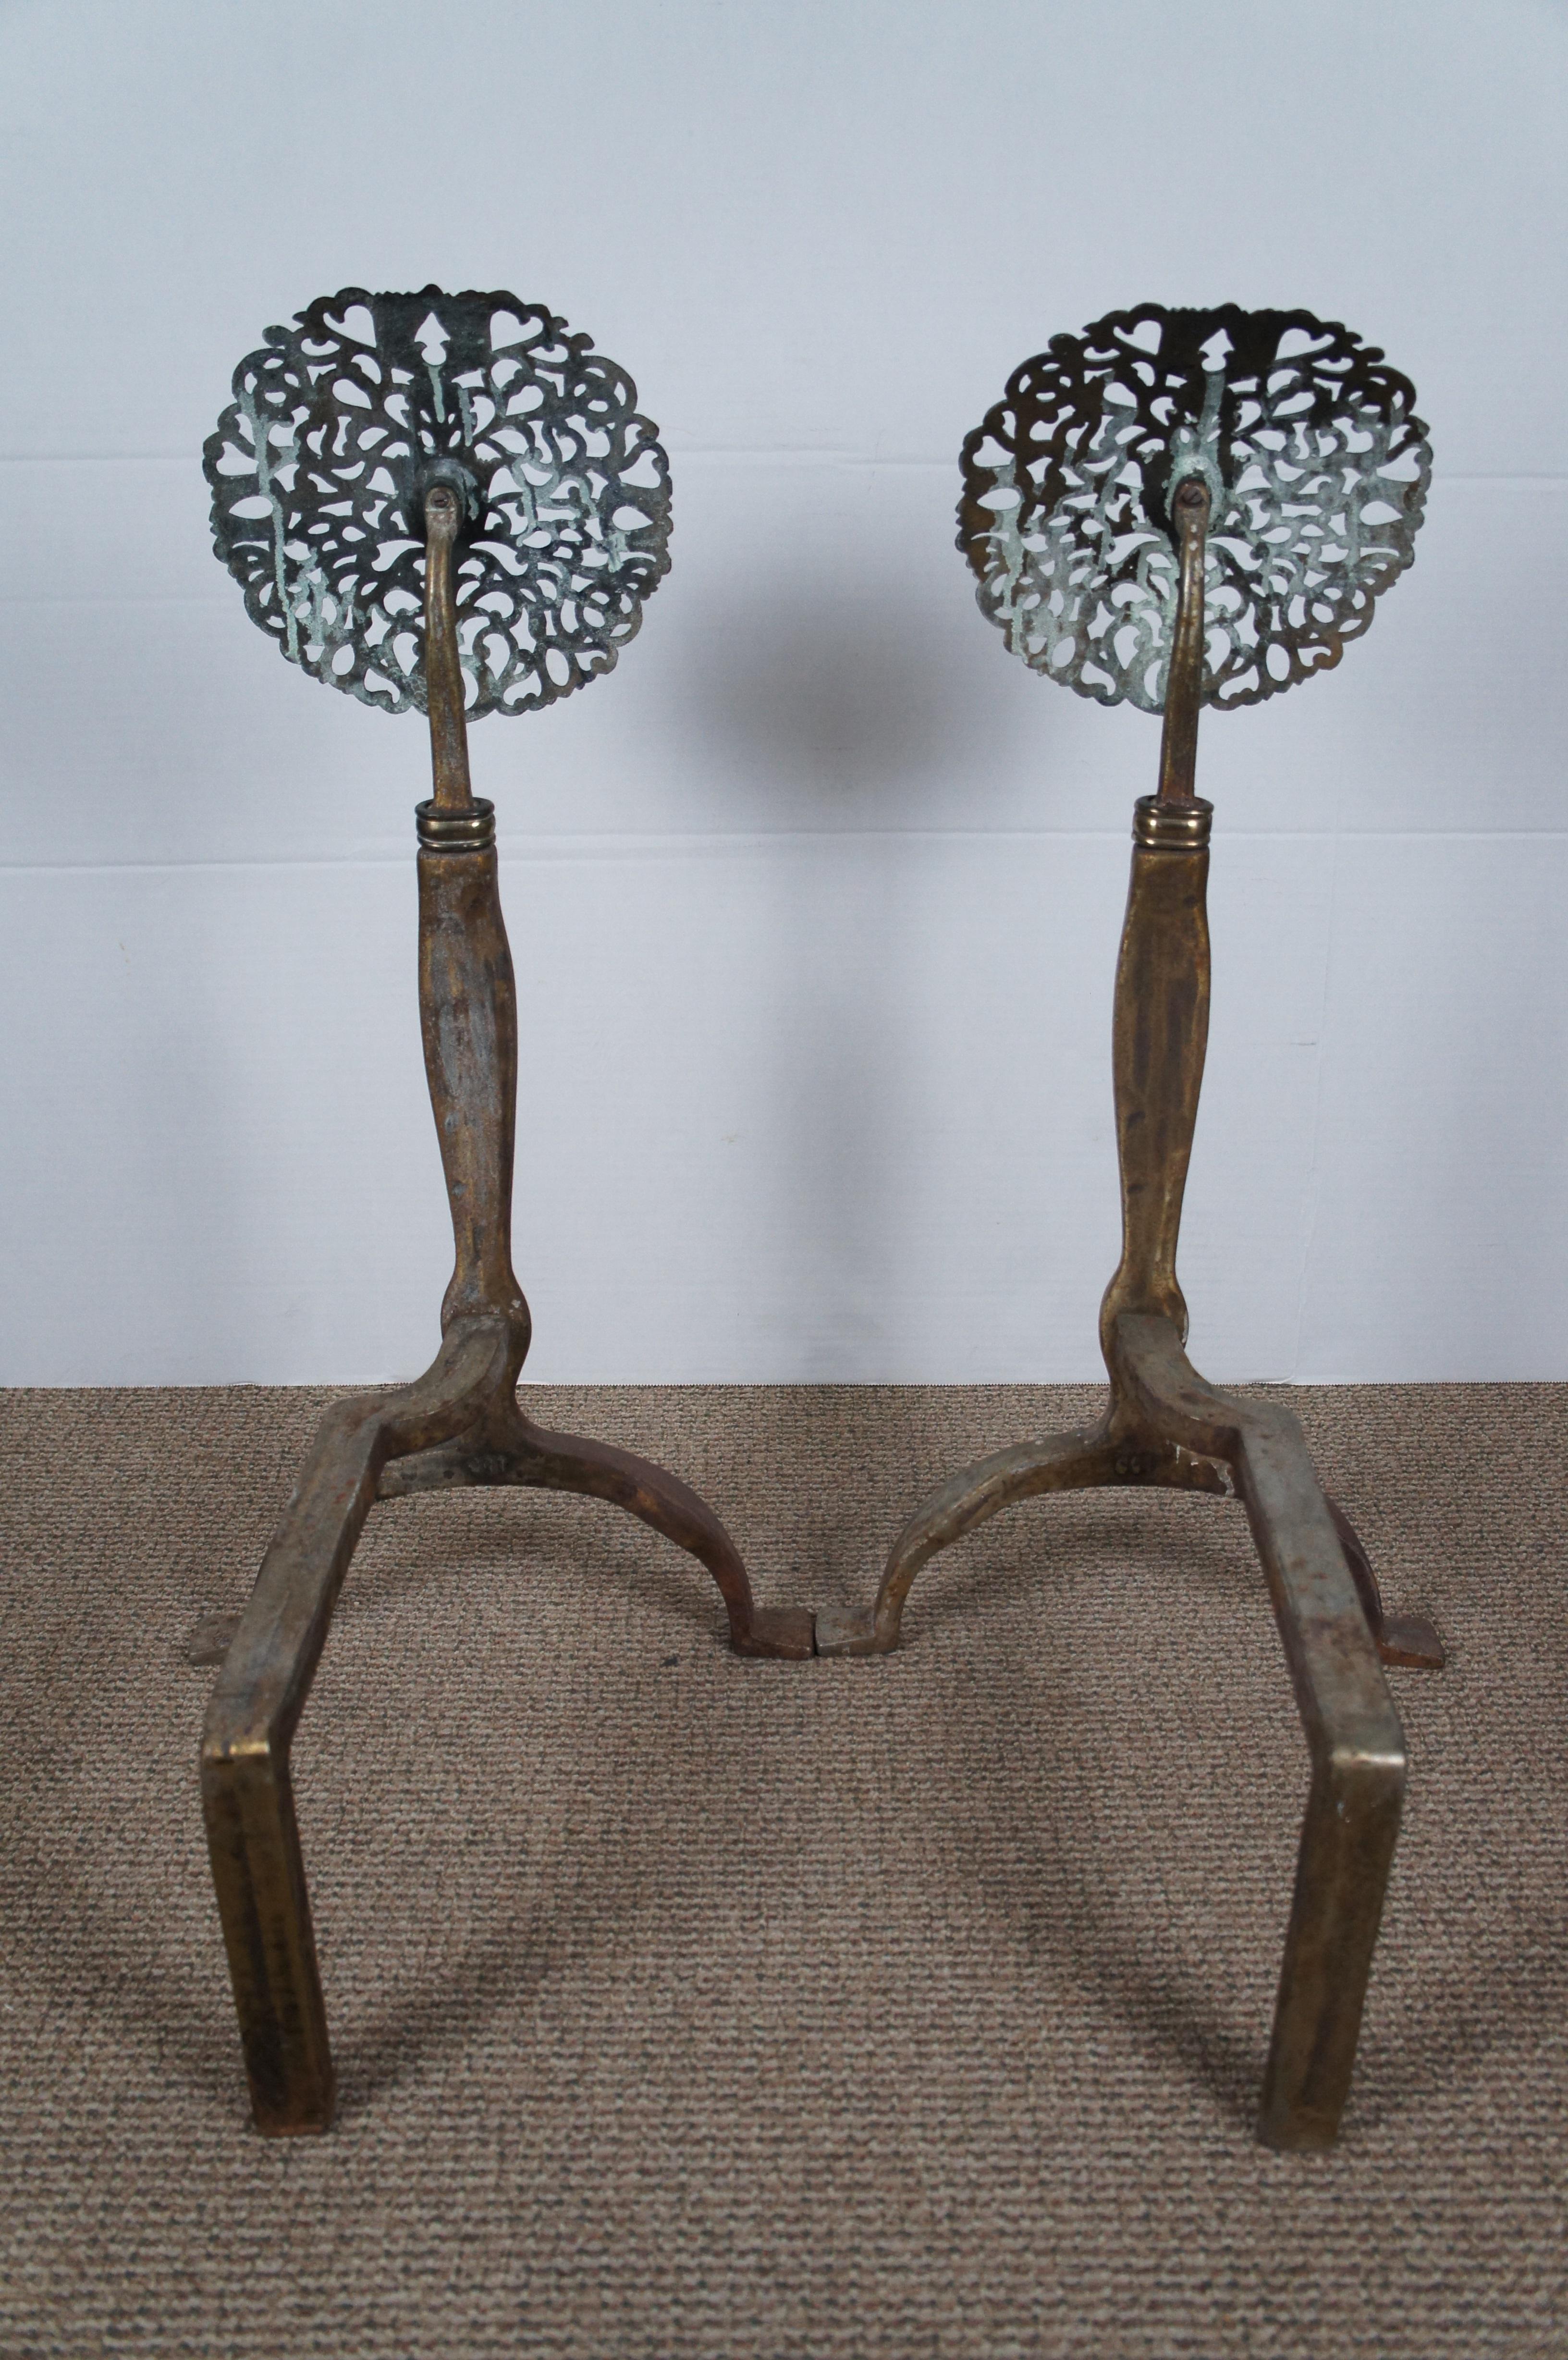 Virginia Metalcrafters Art Deco Brass Iron Floral Medallion Andirons Firedogs 27 For Sale 3